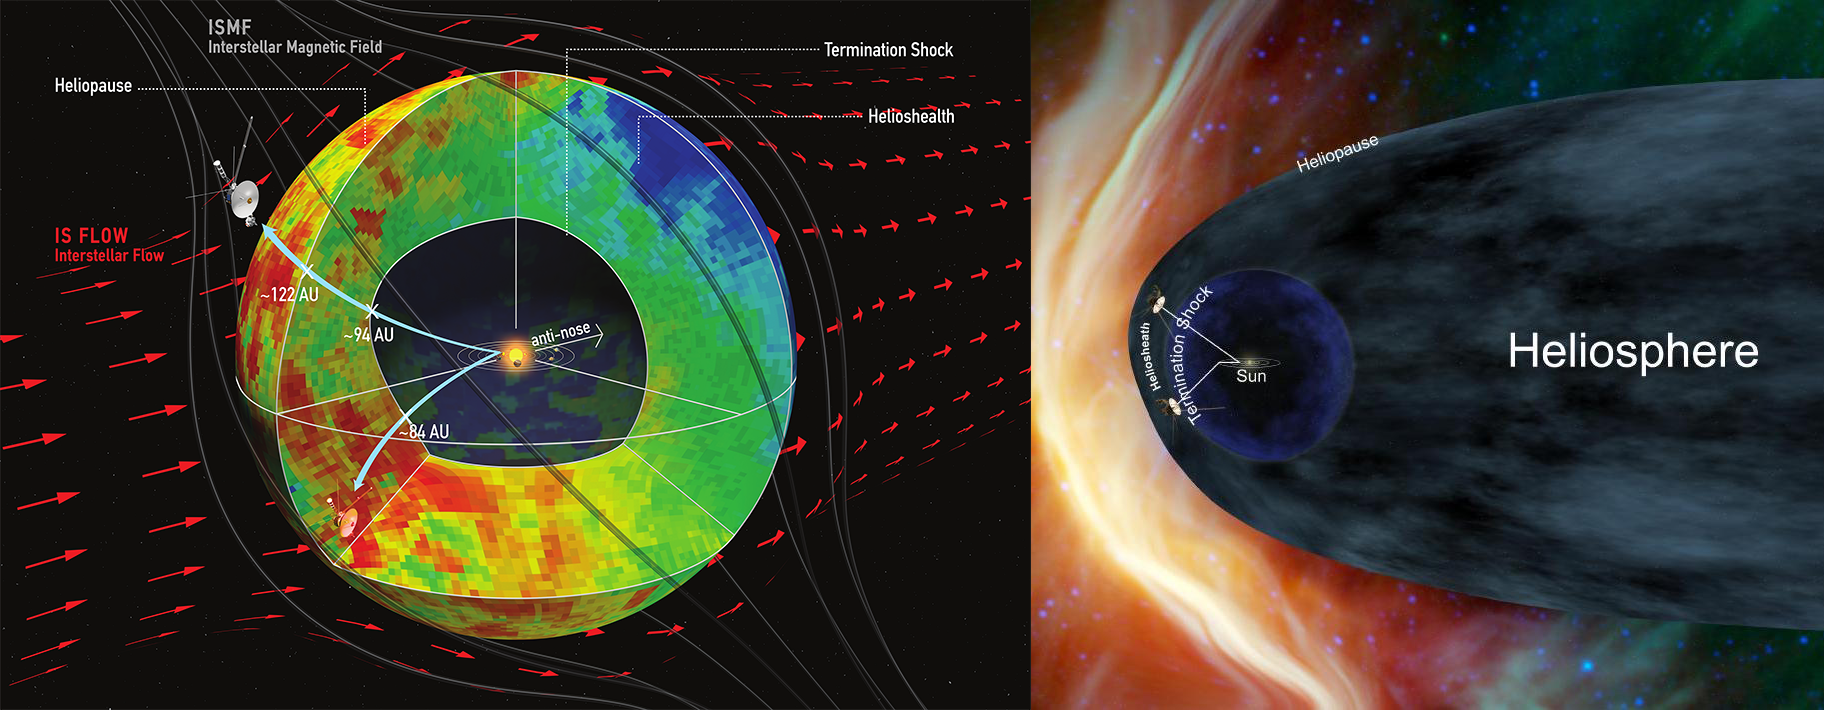 two illustrations depicting models of the heliosphere's shape